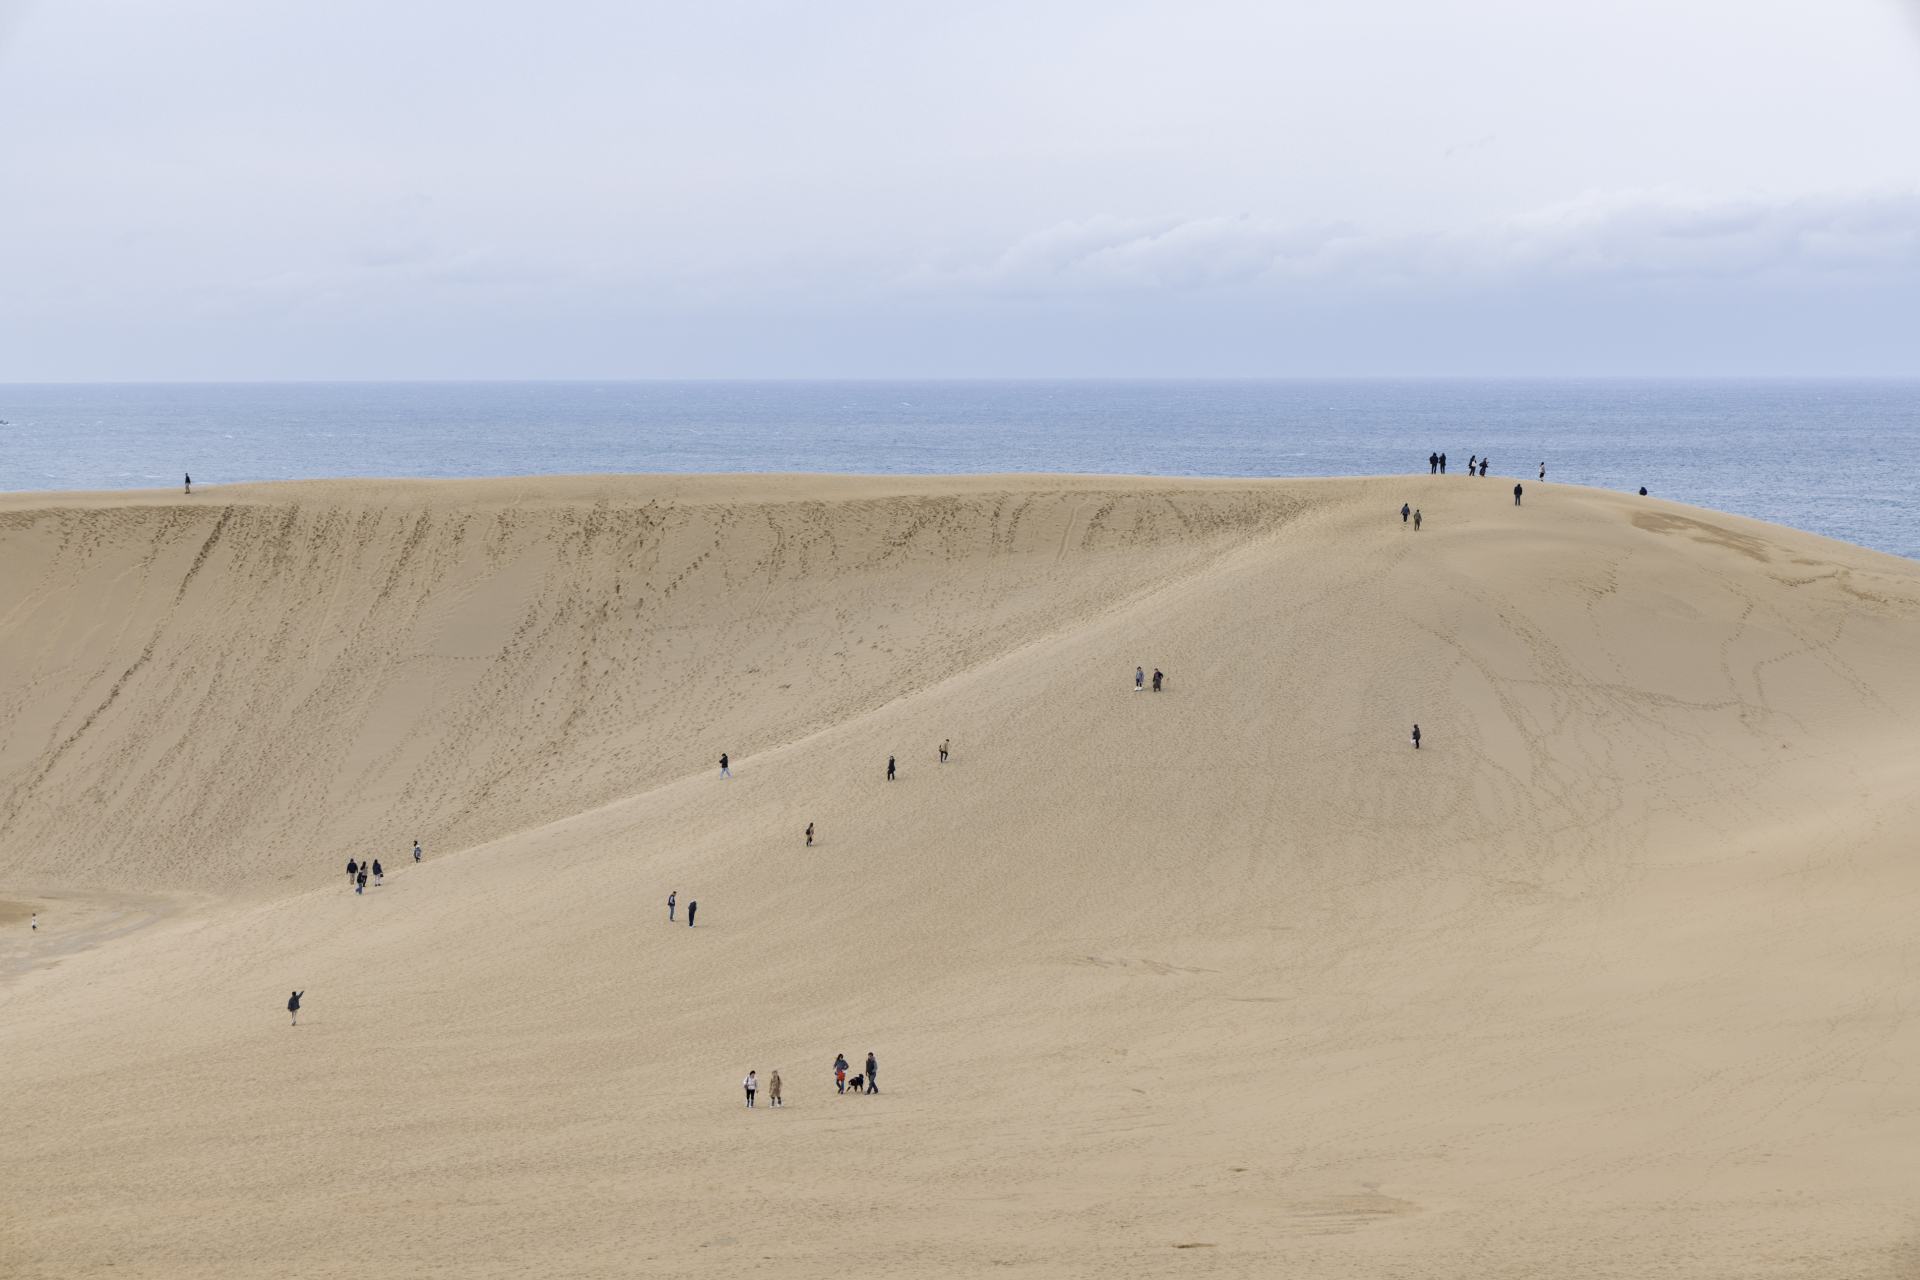 Humans look like little ants walking on the openly large and wide sand dunes.